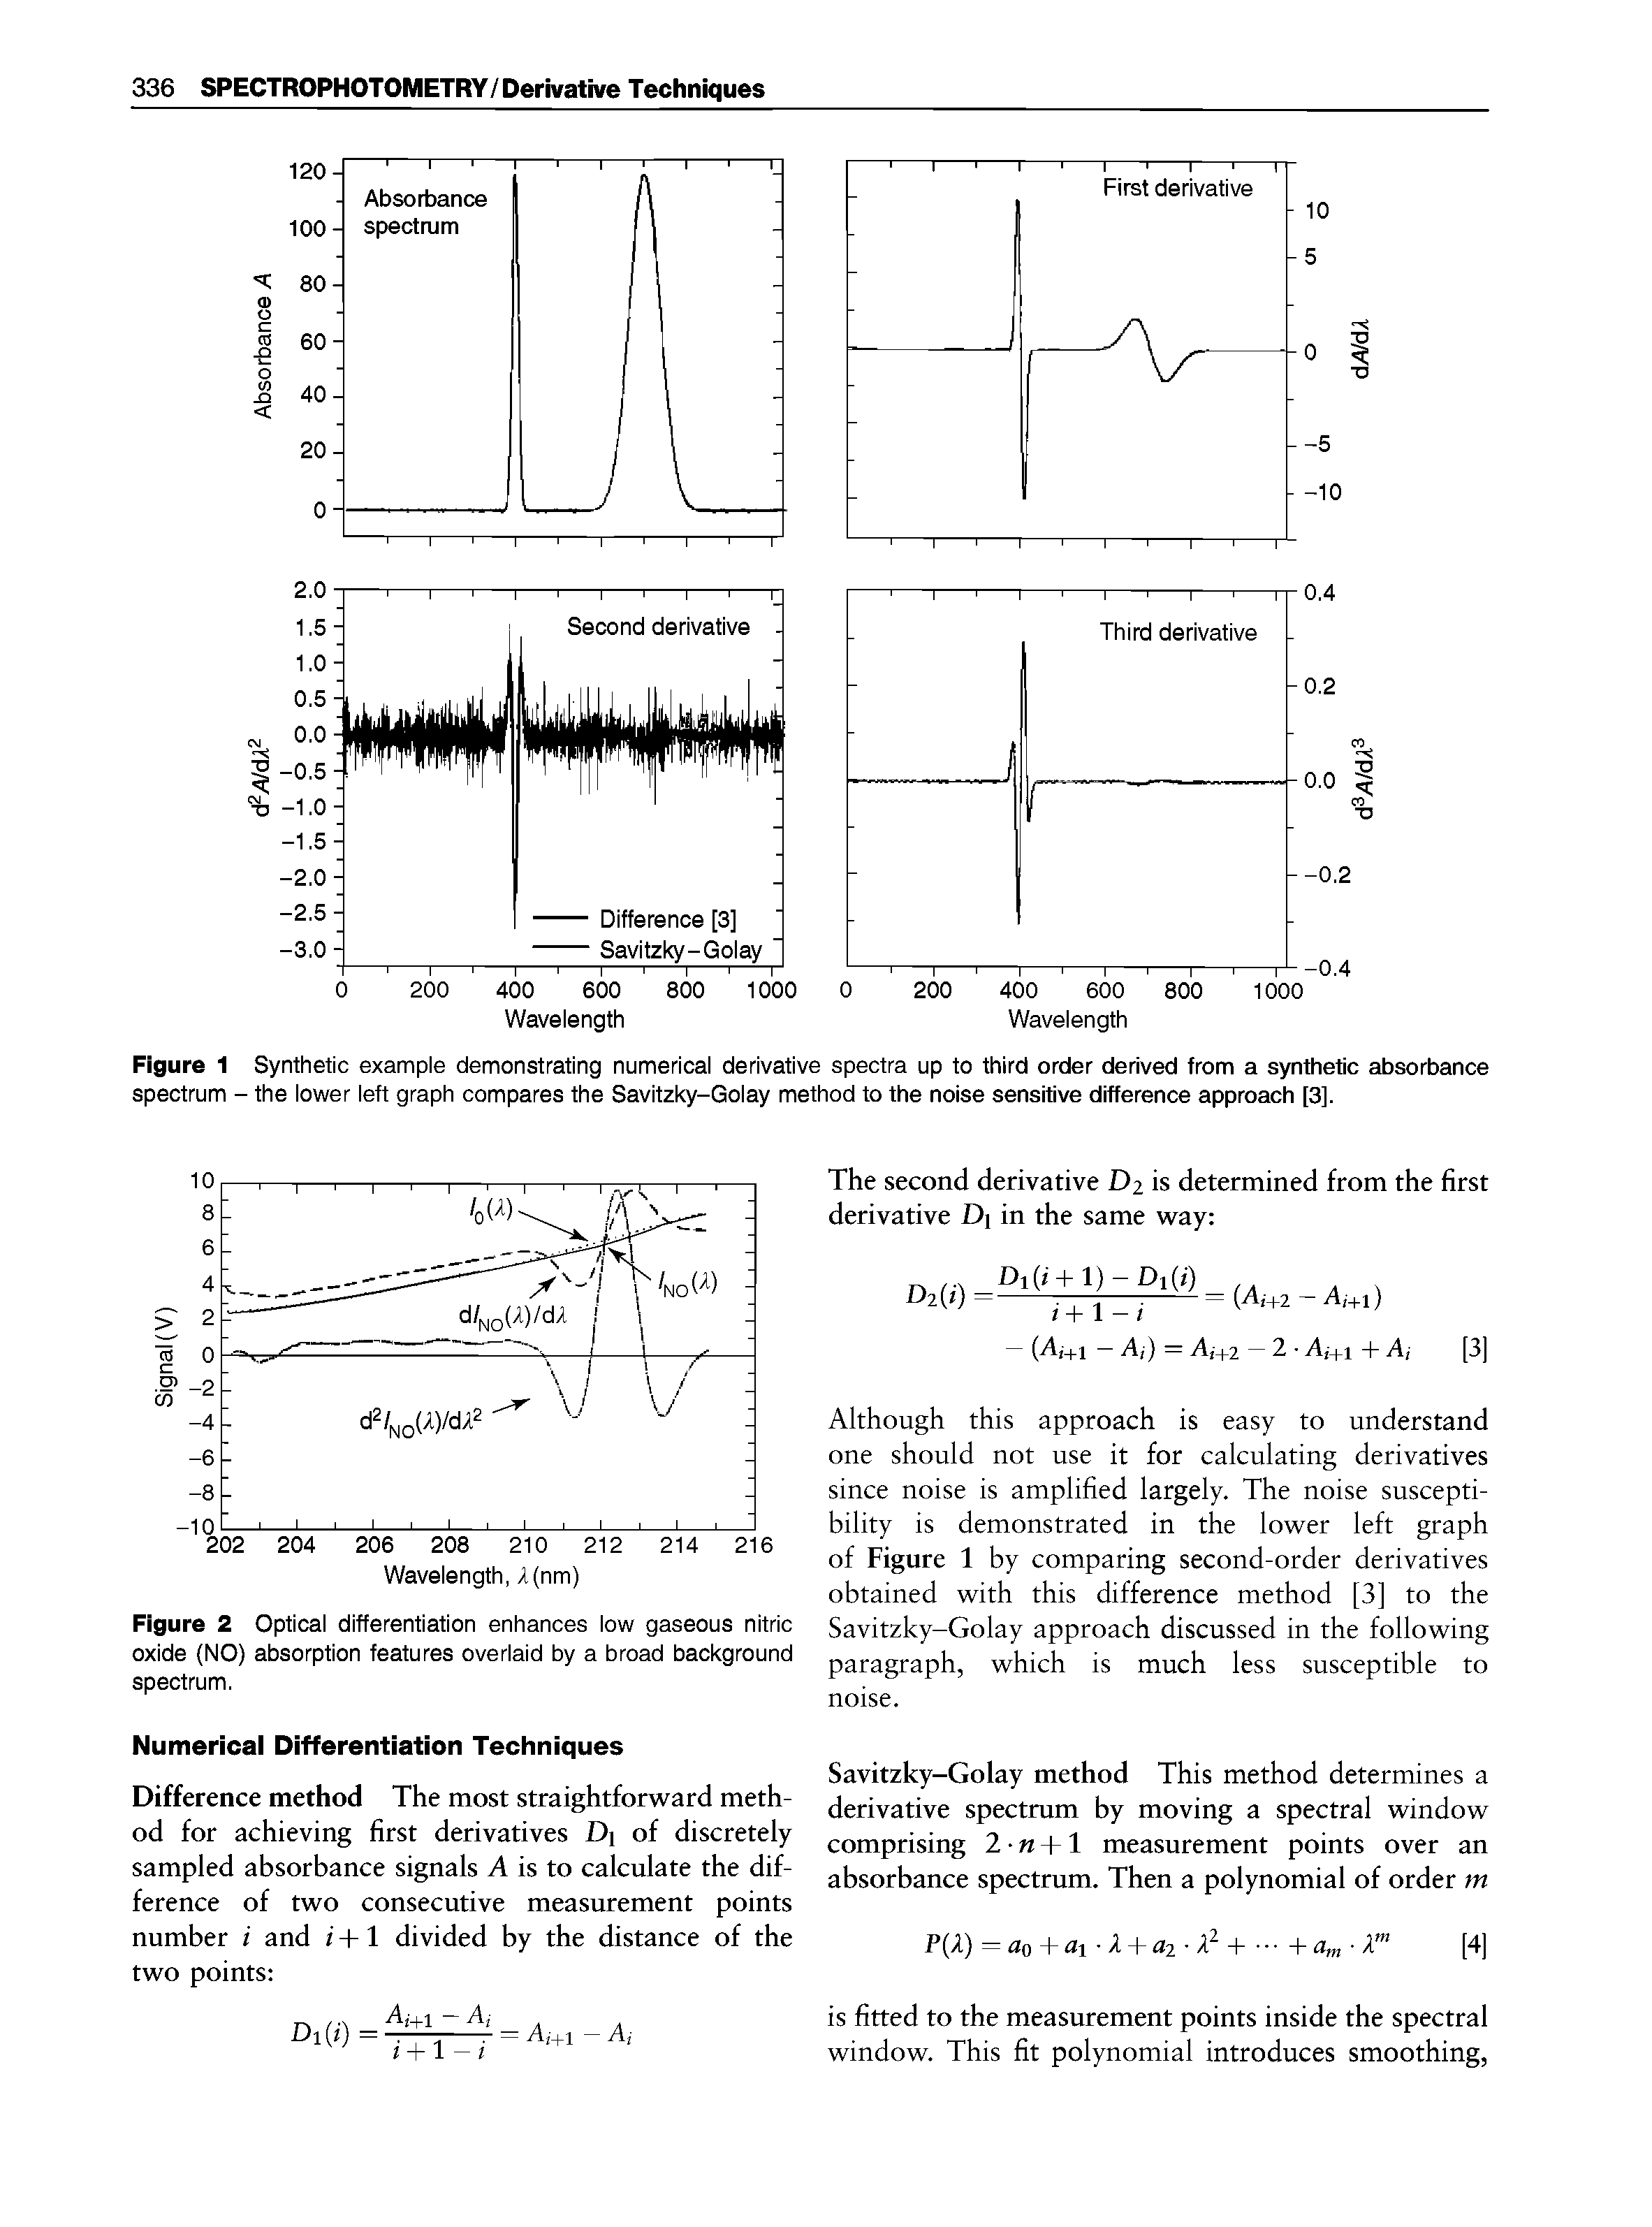 Figure 1 Synthetic example demonstrating numerical derivative spectra up to third order derived from a synthetic absorbance spectrum - the lower left graph compares the Savitzky-Golay method to the noise sensitive difference approach [3].